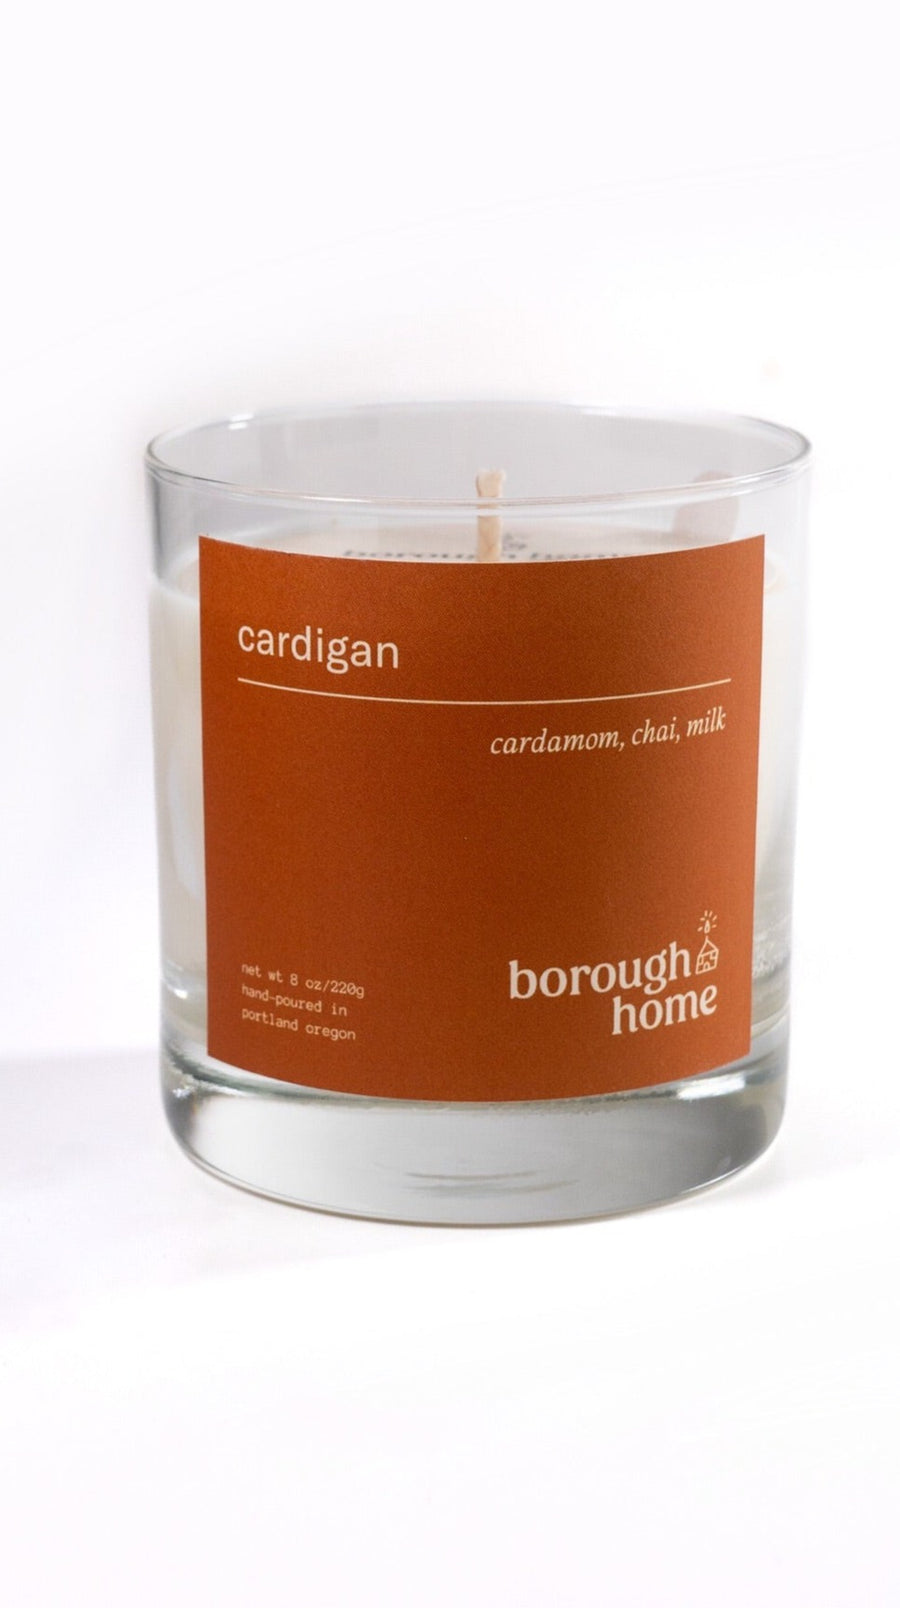 8oz Jar Candle by borough home